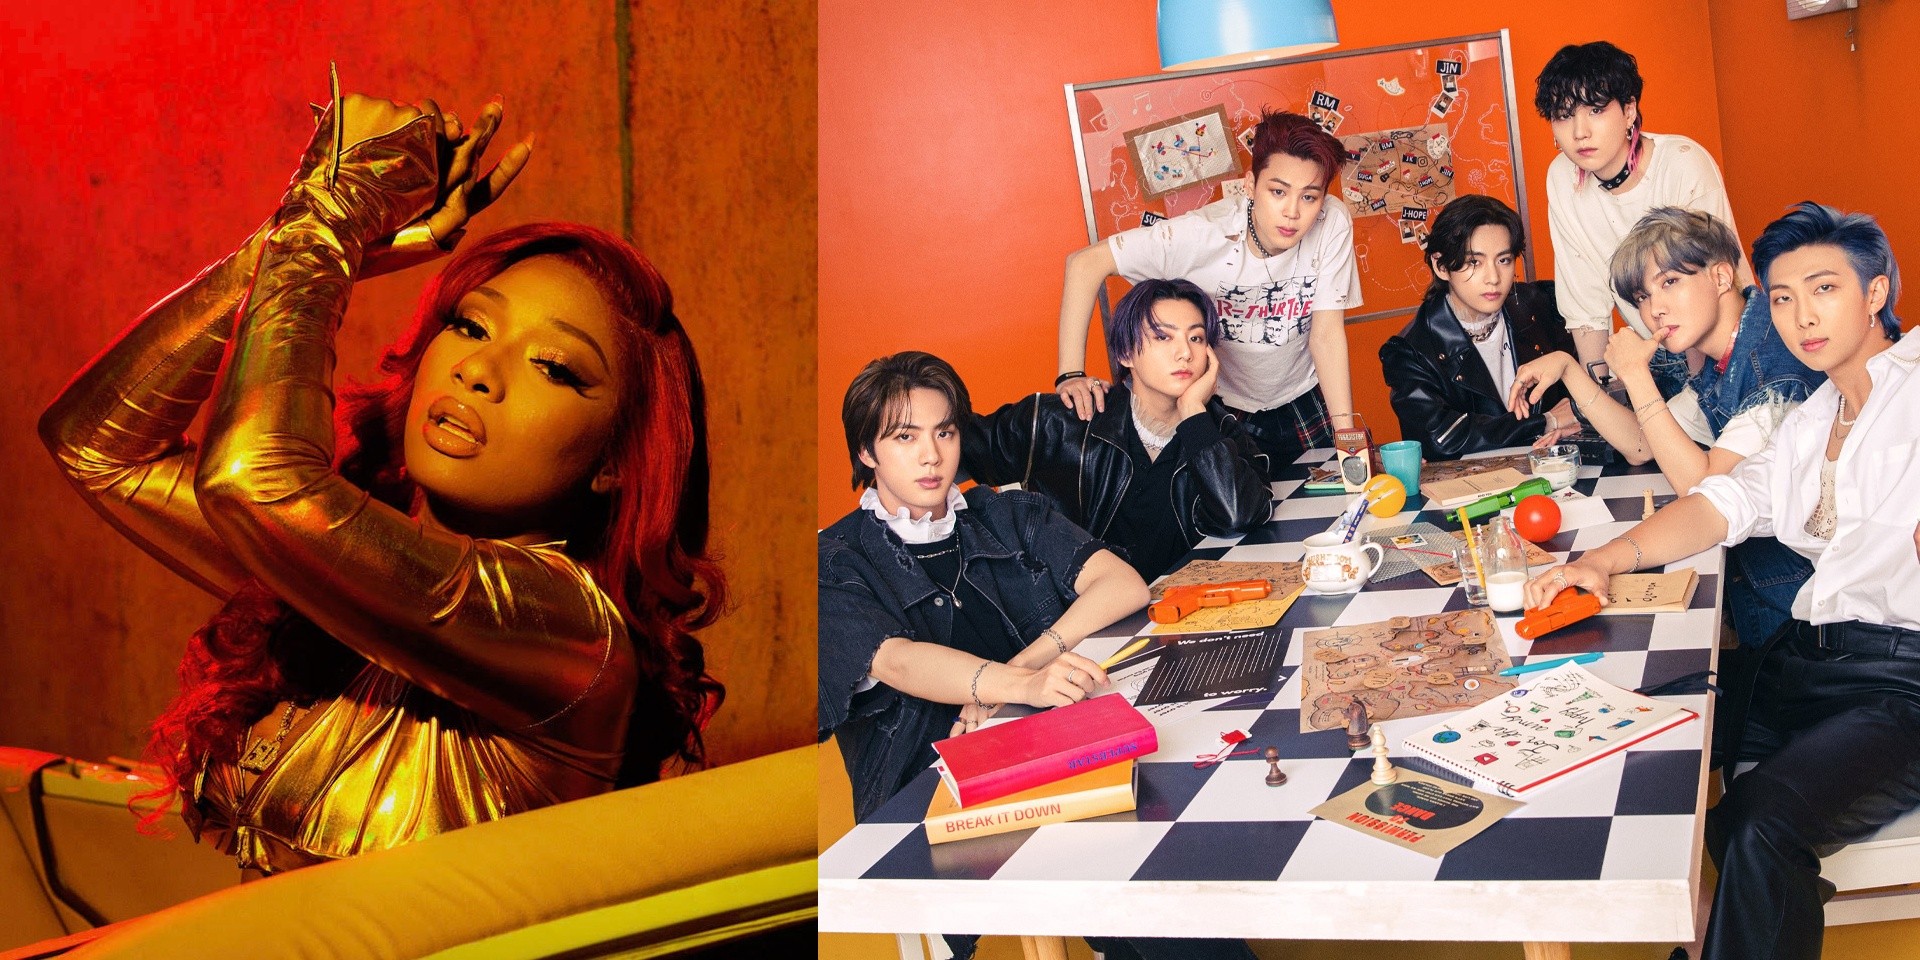 Megan Thee Stallion and BTS drop highly anticipated 'Butter' remix – listen